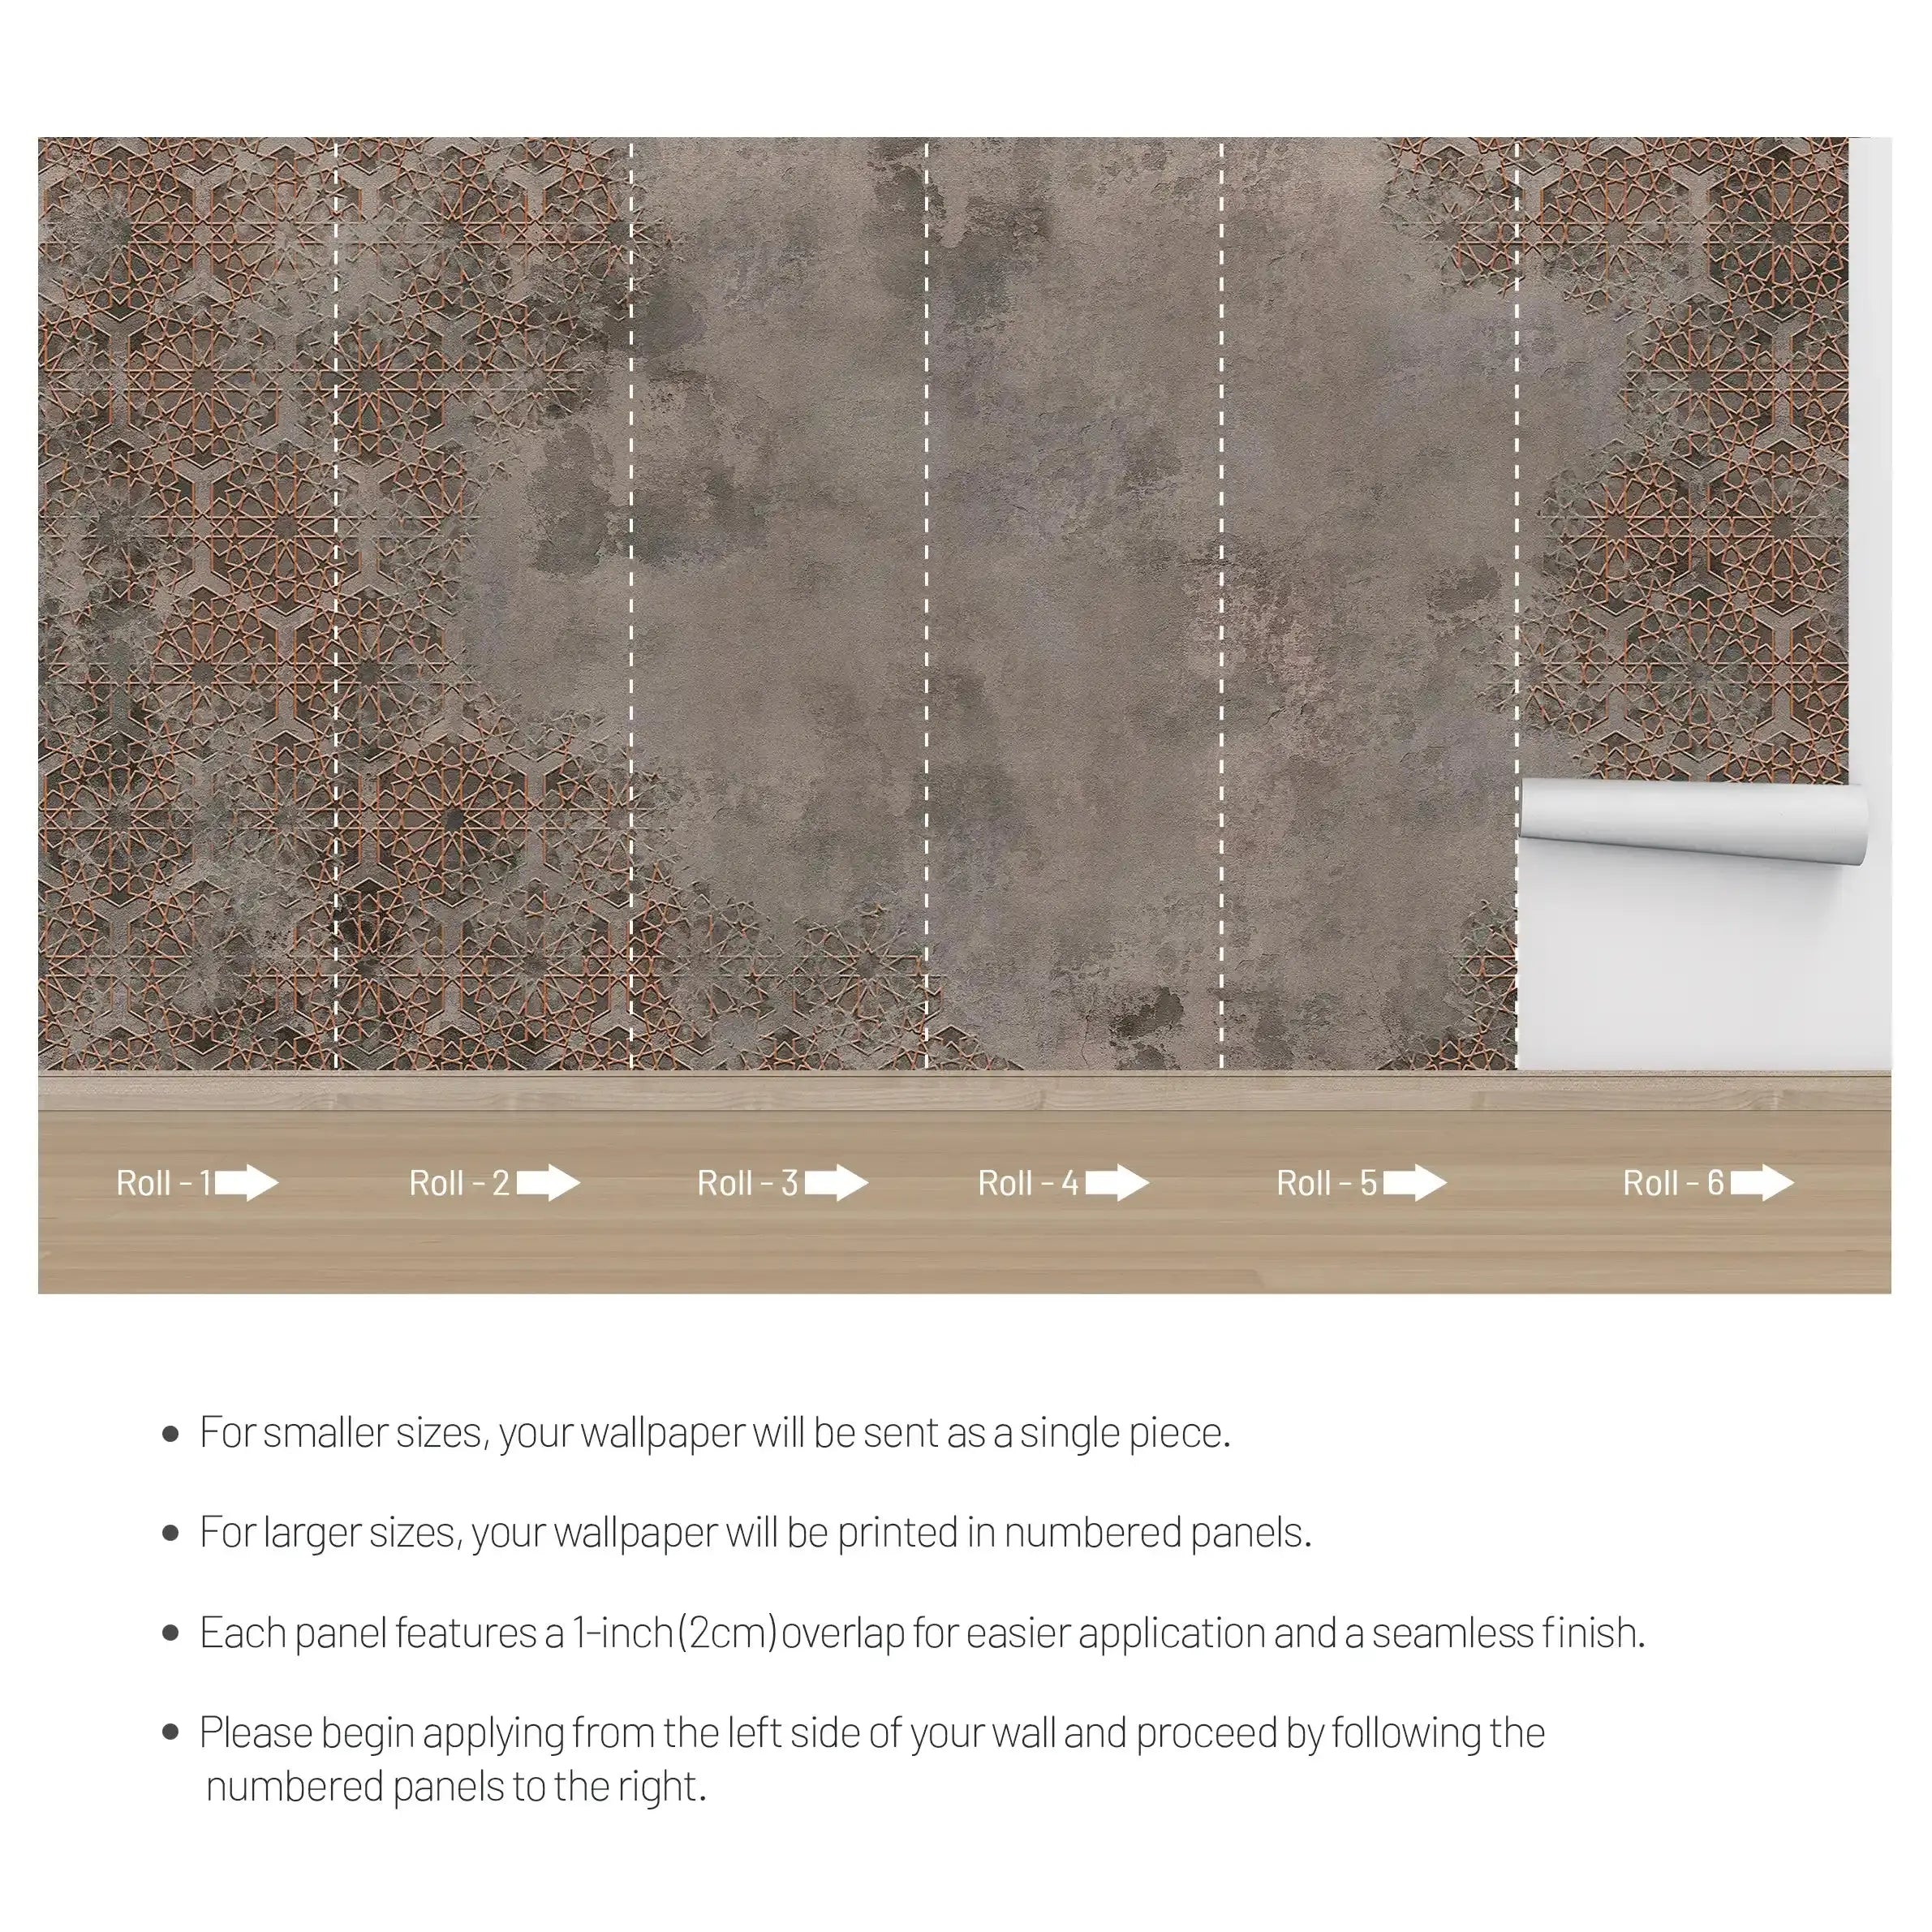 3068-D / Elegant Floral Abstract Peel and Stick Wallpaper with Orange Border - Perfect for Modern Room Deco - Artevella